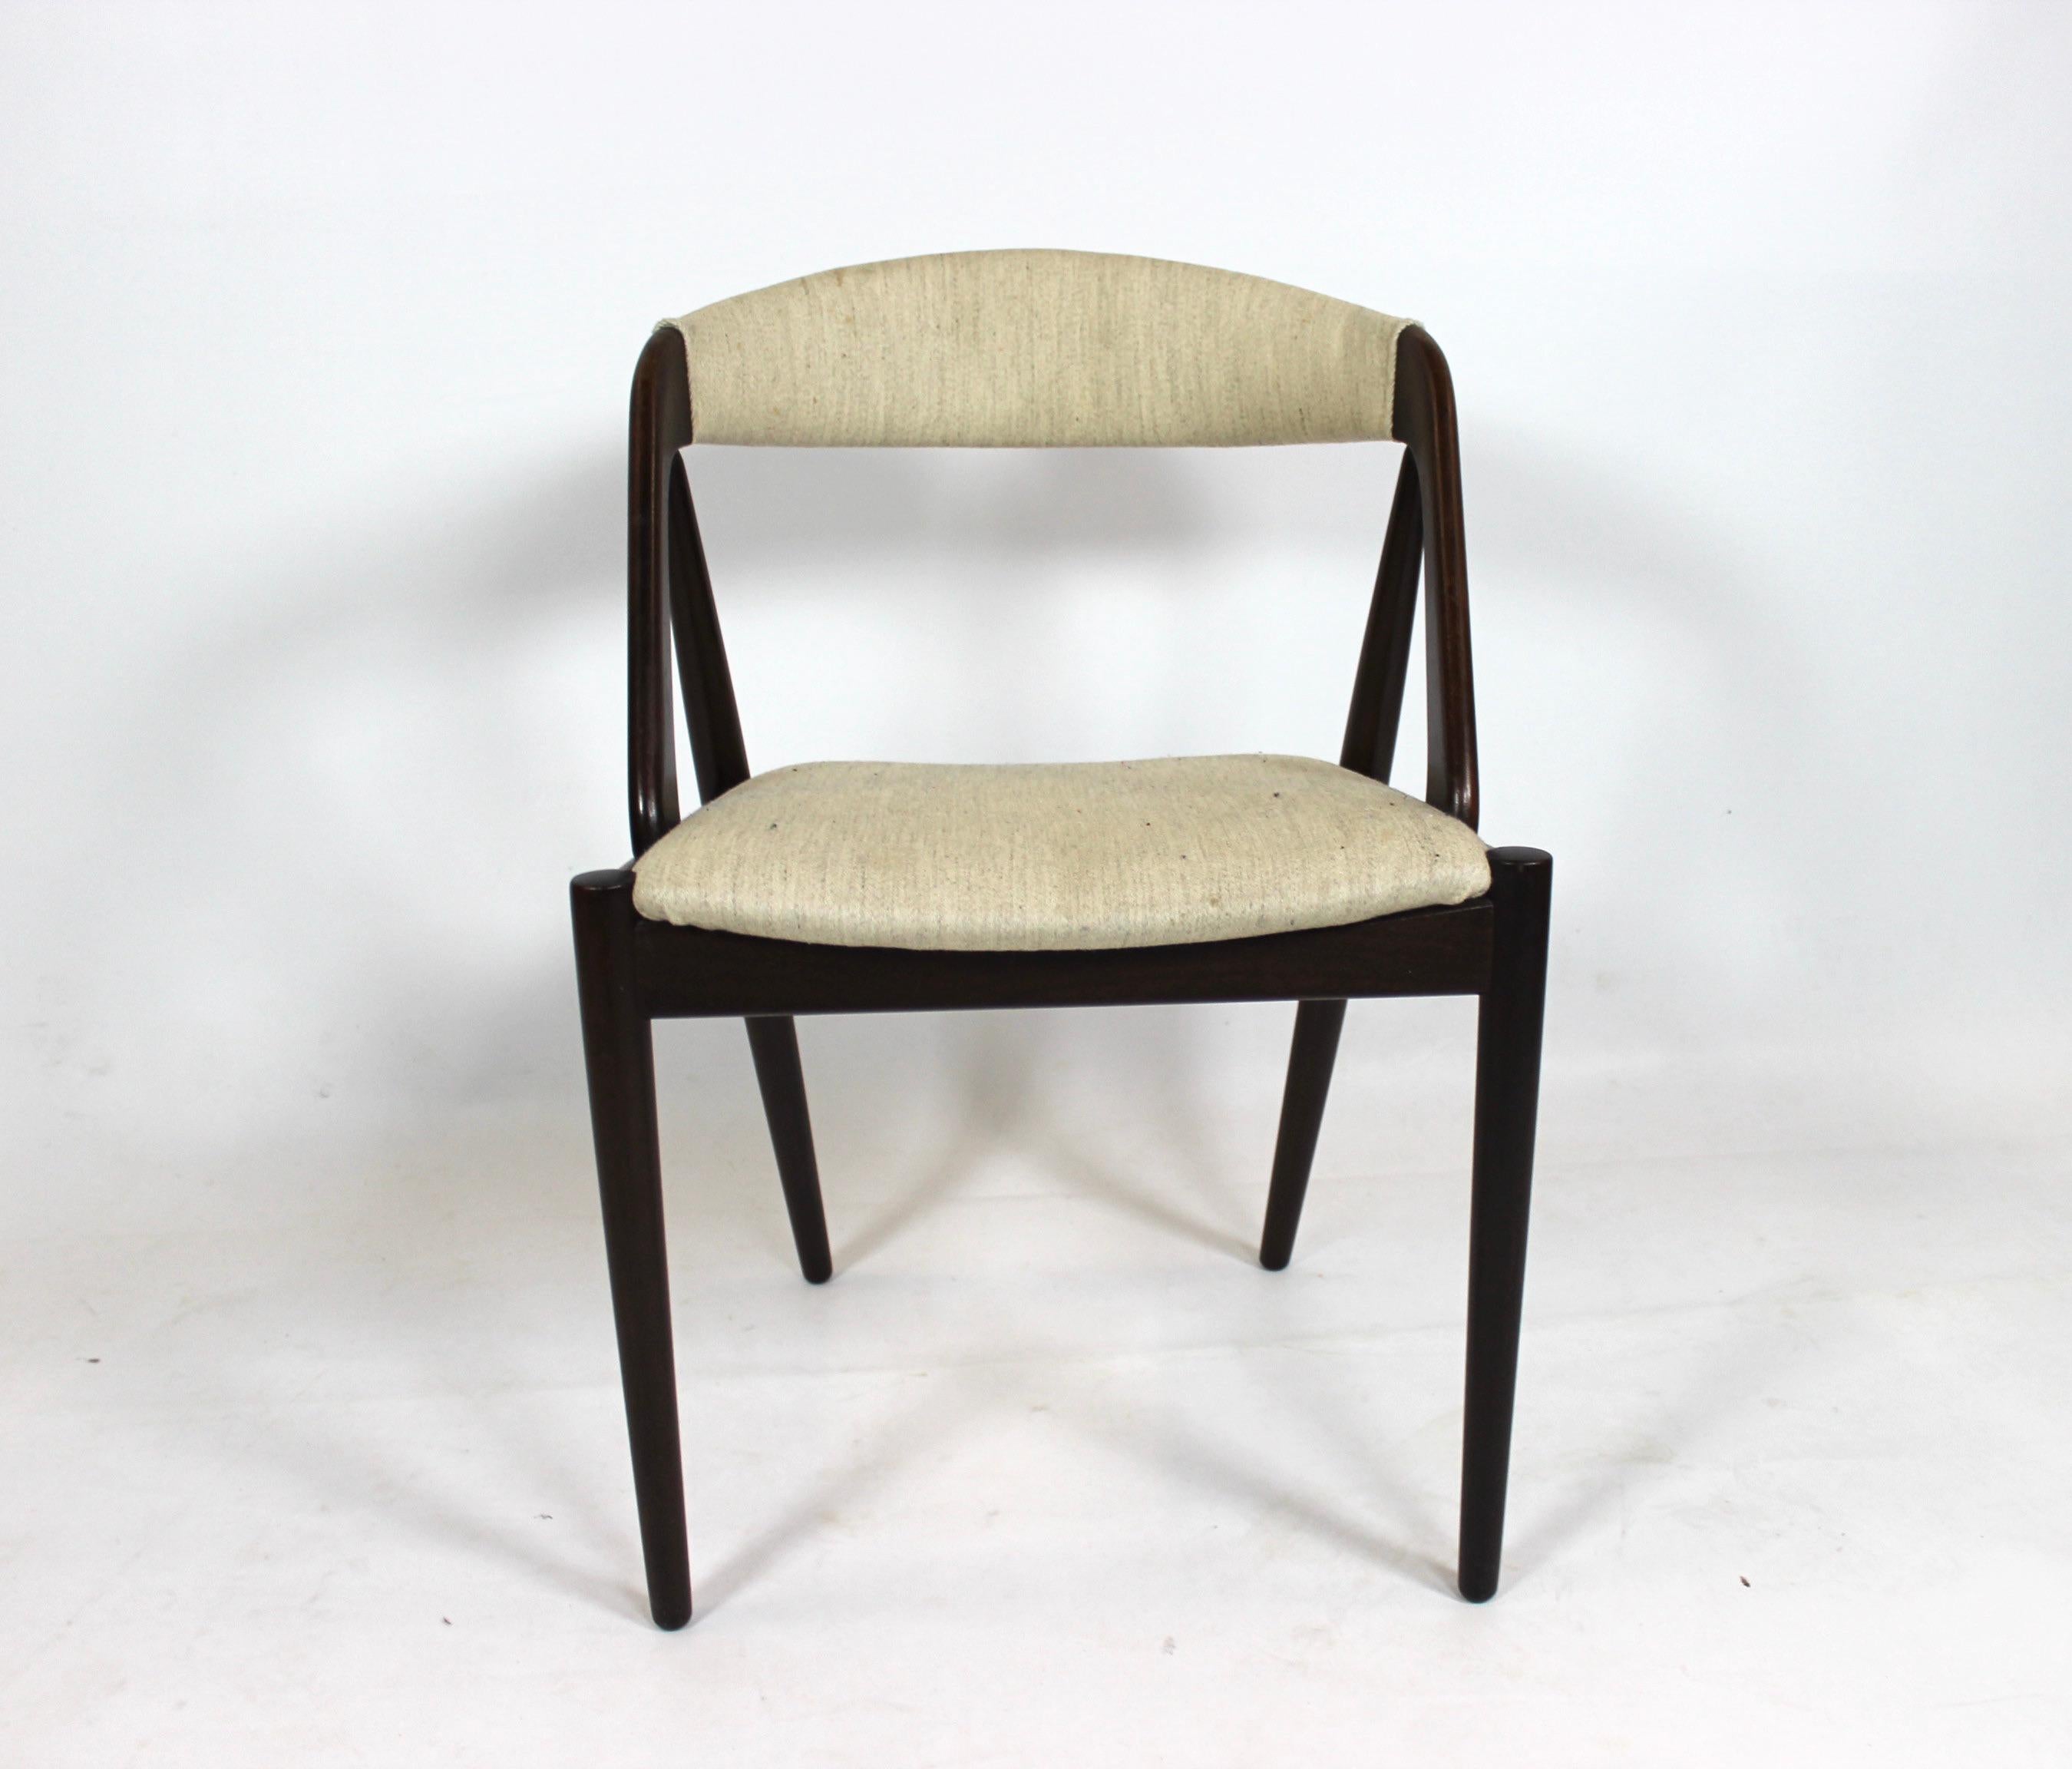 A set of six dining chairs, model 31, designed by Kai Kristiansen and manufactured by Schou Andersen in the 1960s. The chairs are of teak and upholstered with light fabric.